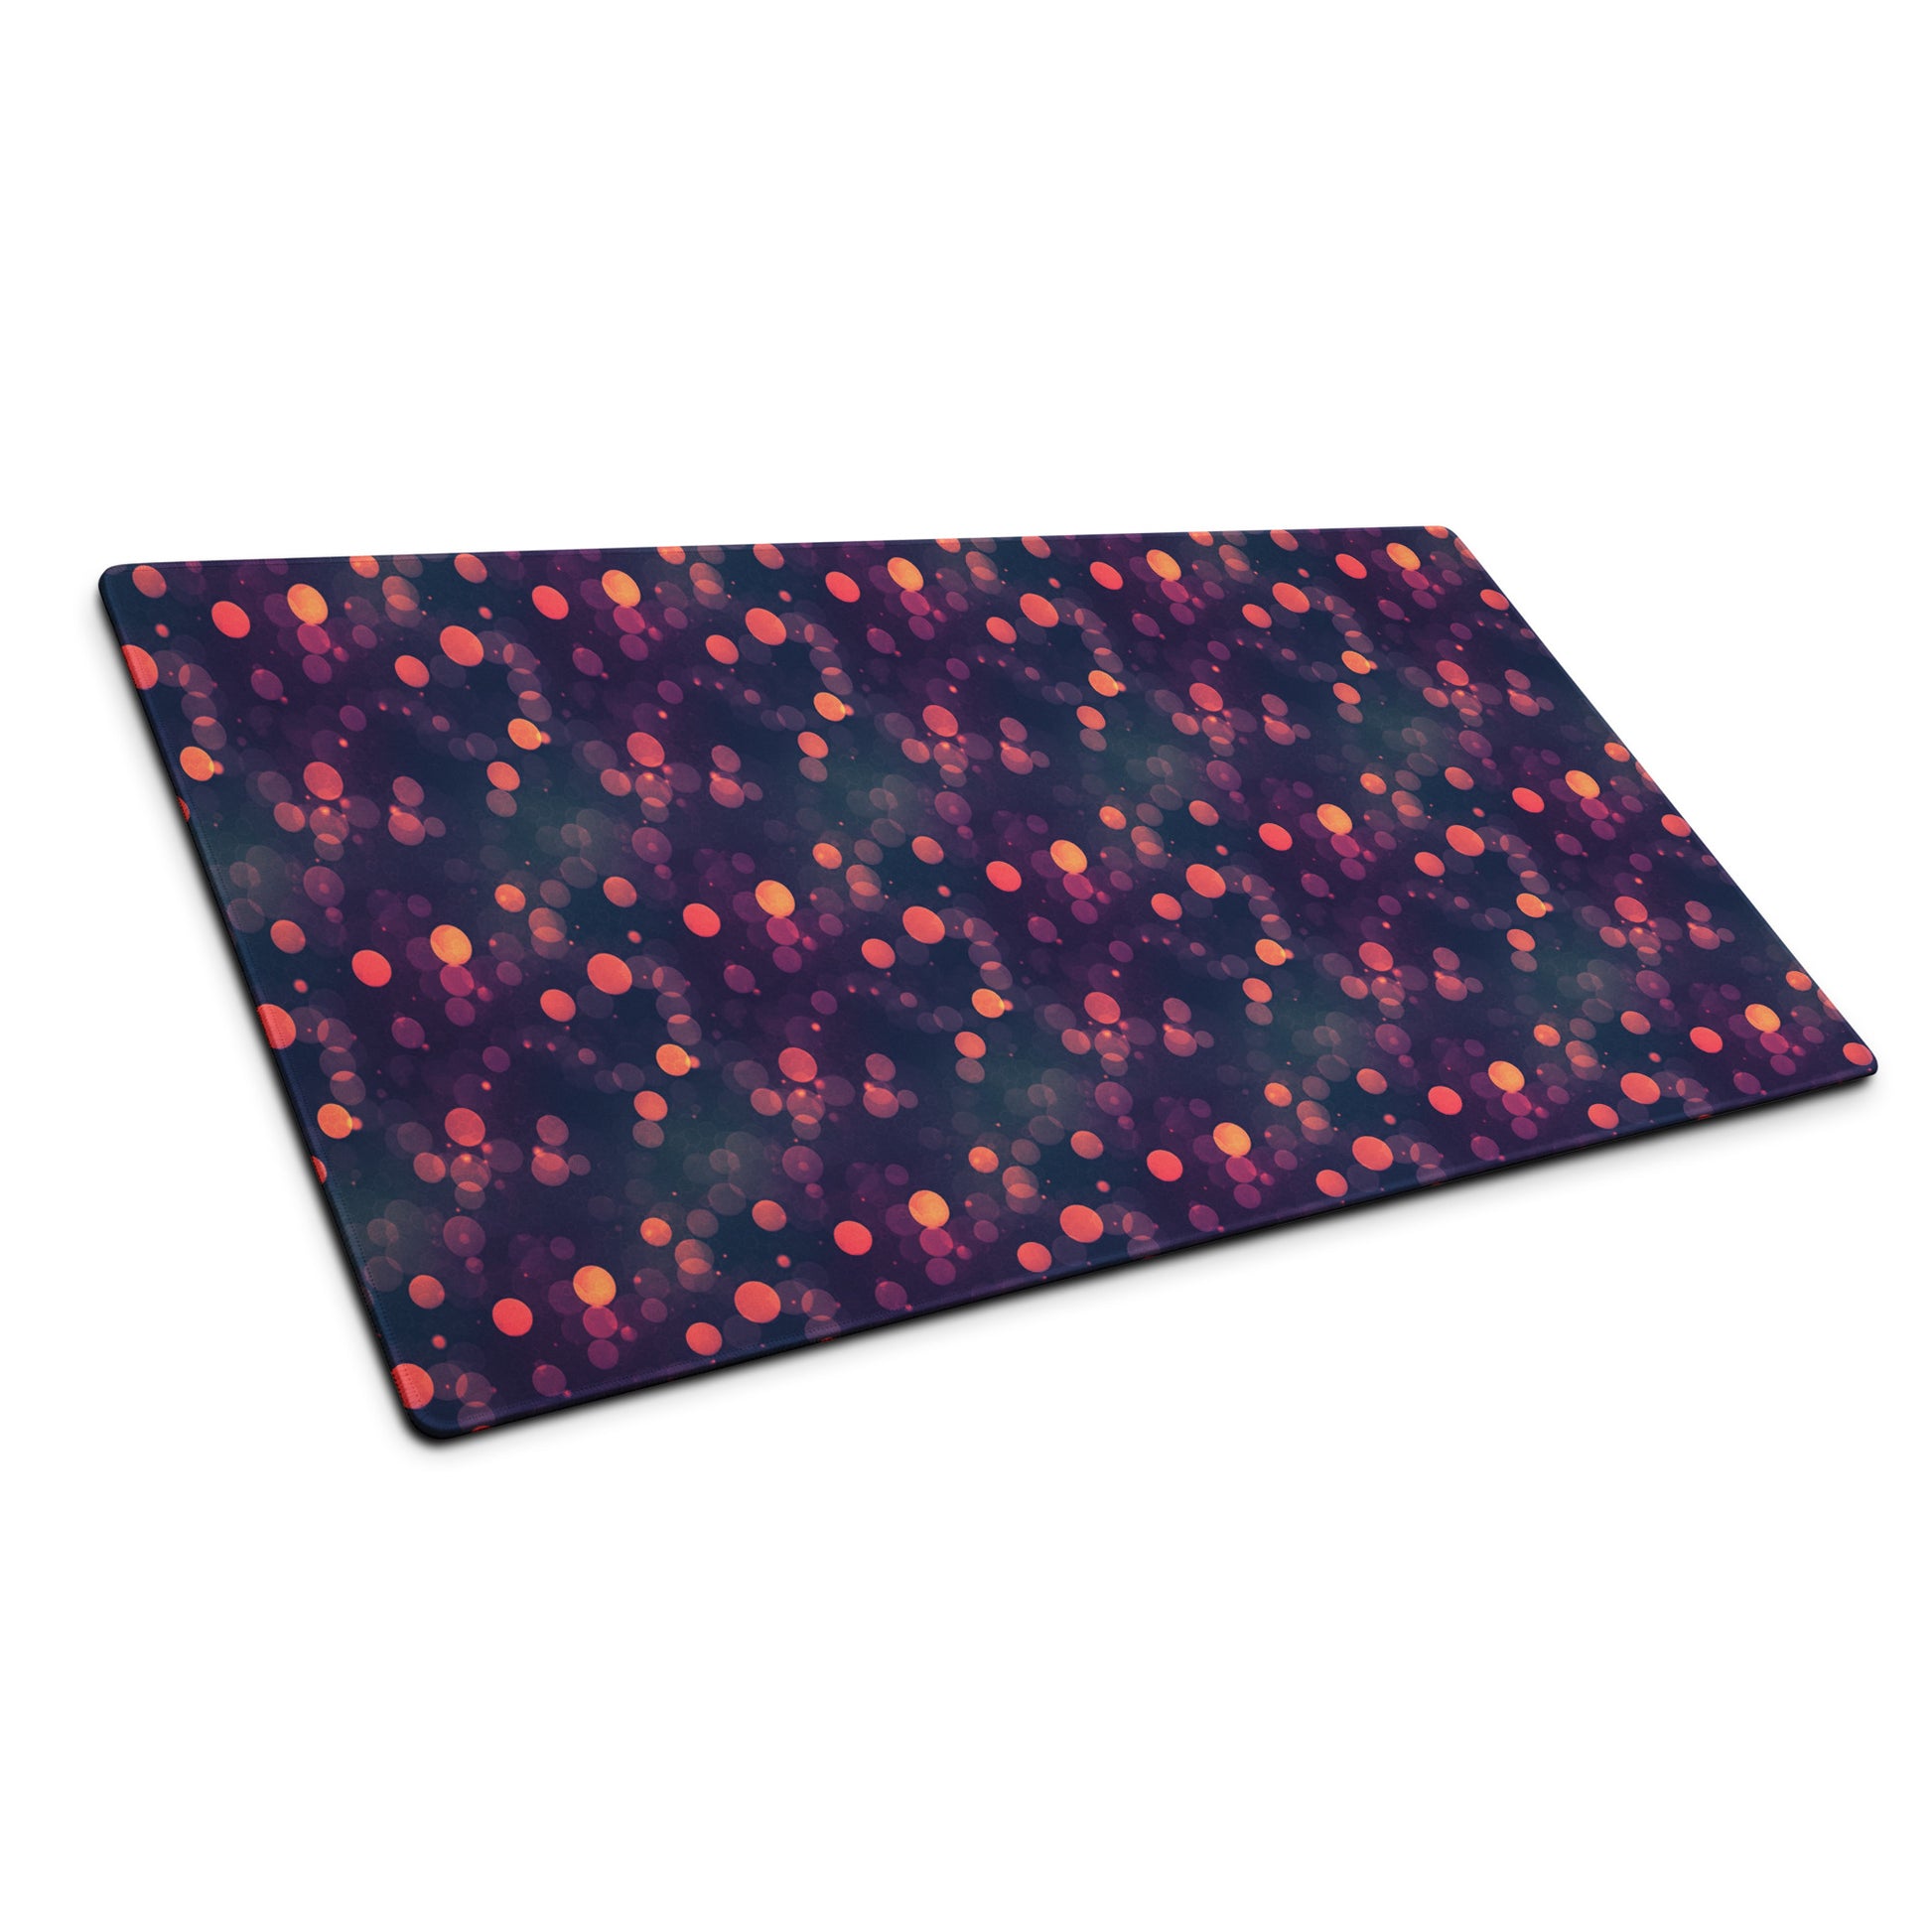 A 36" x 18" desk pad with a purple and red polka dot pattern sitting at an angle.